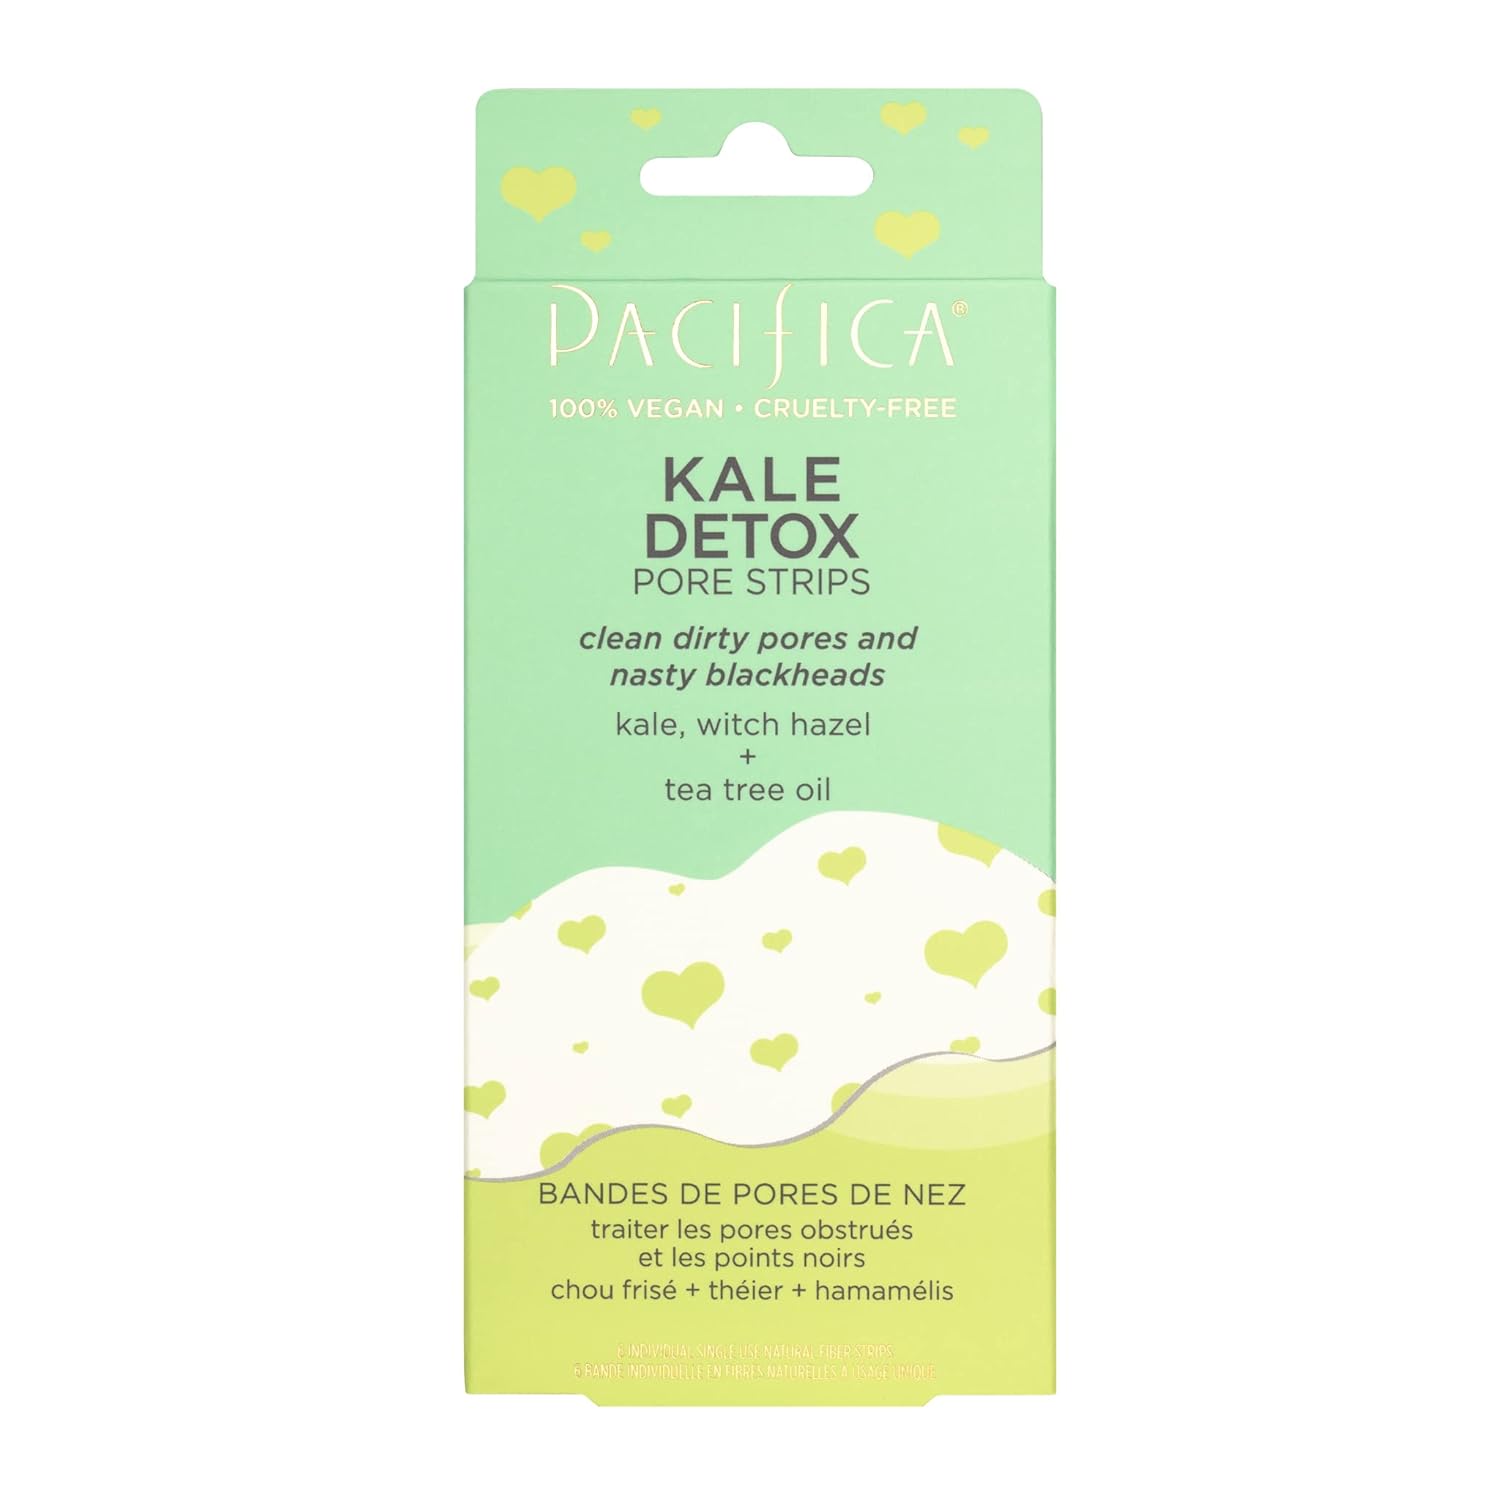 Pacifica Beauty, Kale Detox Nose Pore Strip, Blackhead Remover for Face, Pore Cleaner, Pore Cleansing Strips, Witch Hazel, Tea Tree Oil, Deep Cleaning, Clogged Pores, Skincare, Vegan & Cruelty Free